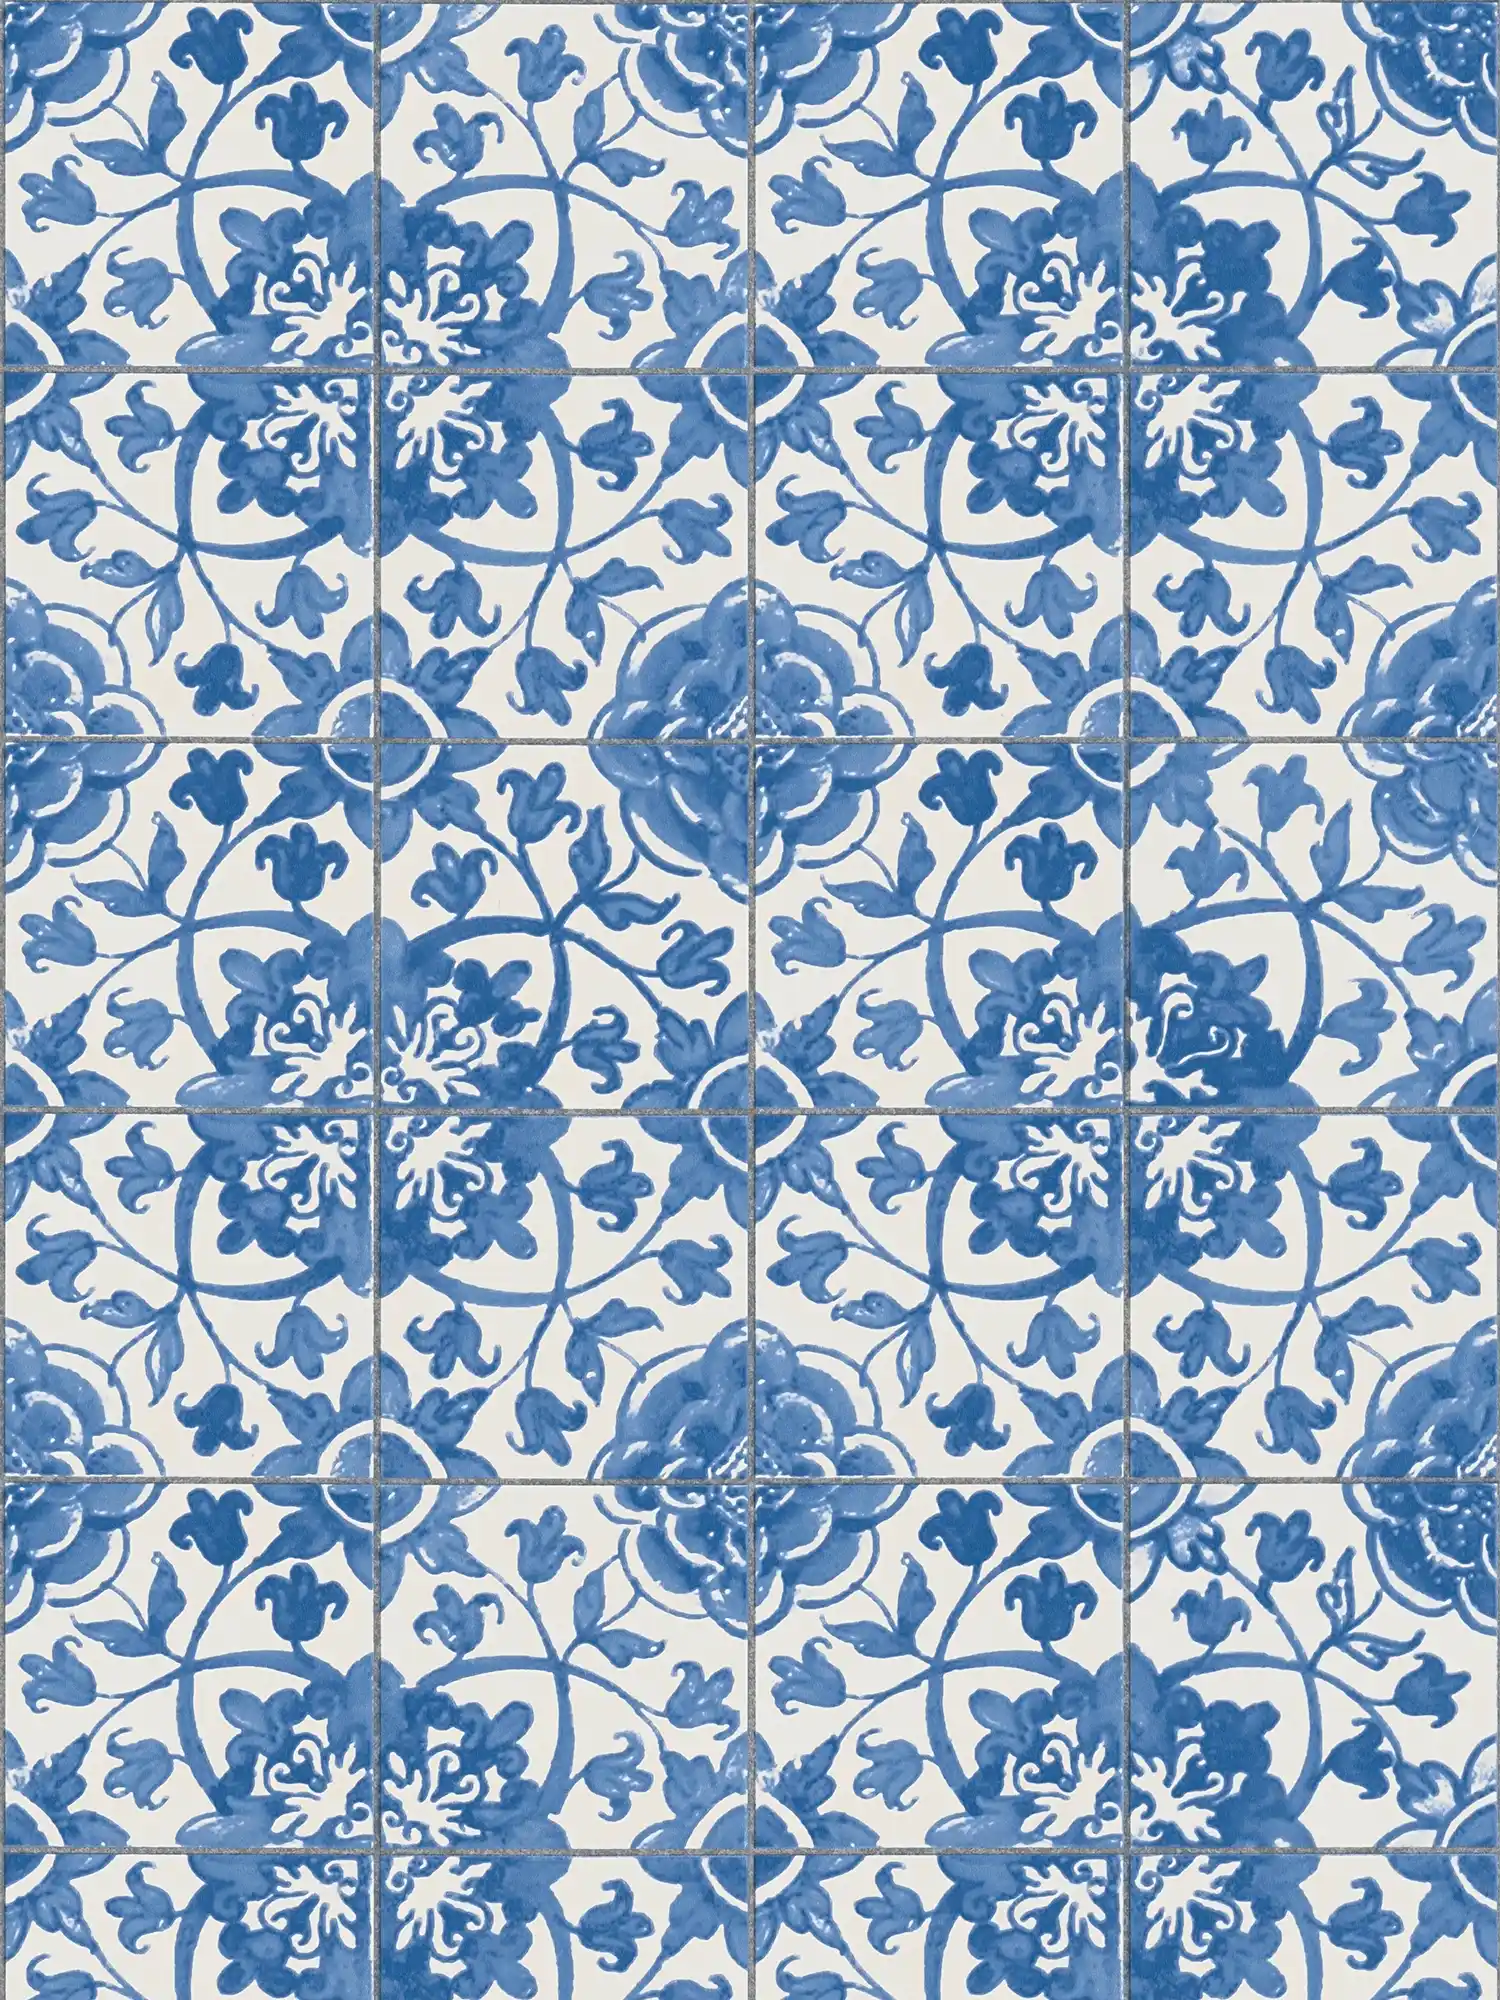 Self-adhesive wallpaper | tile look in vintag style - blue, white
